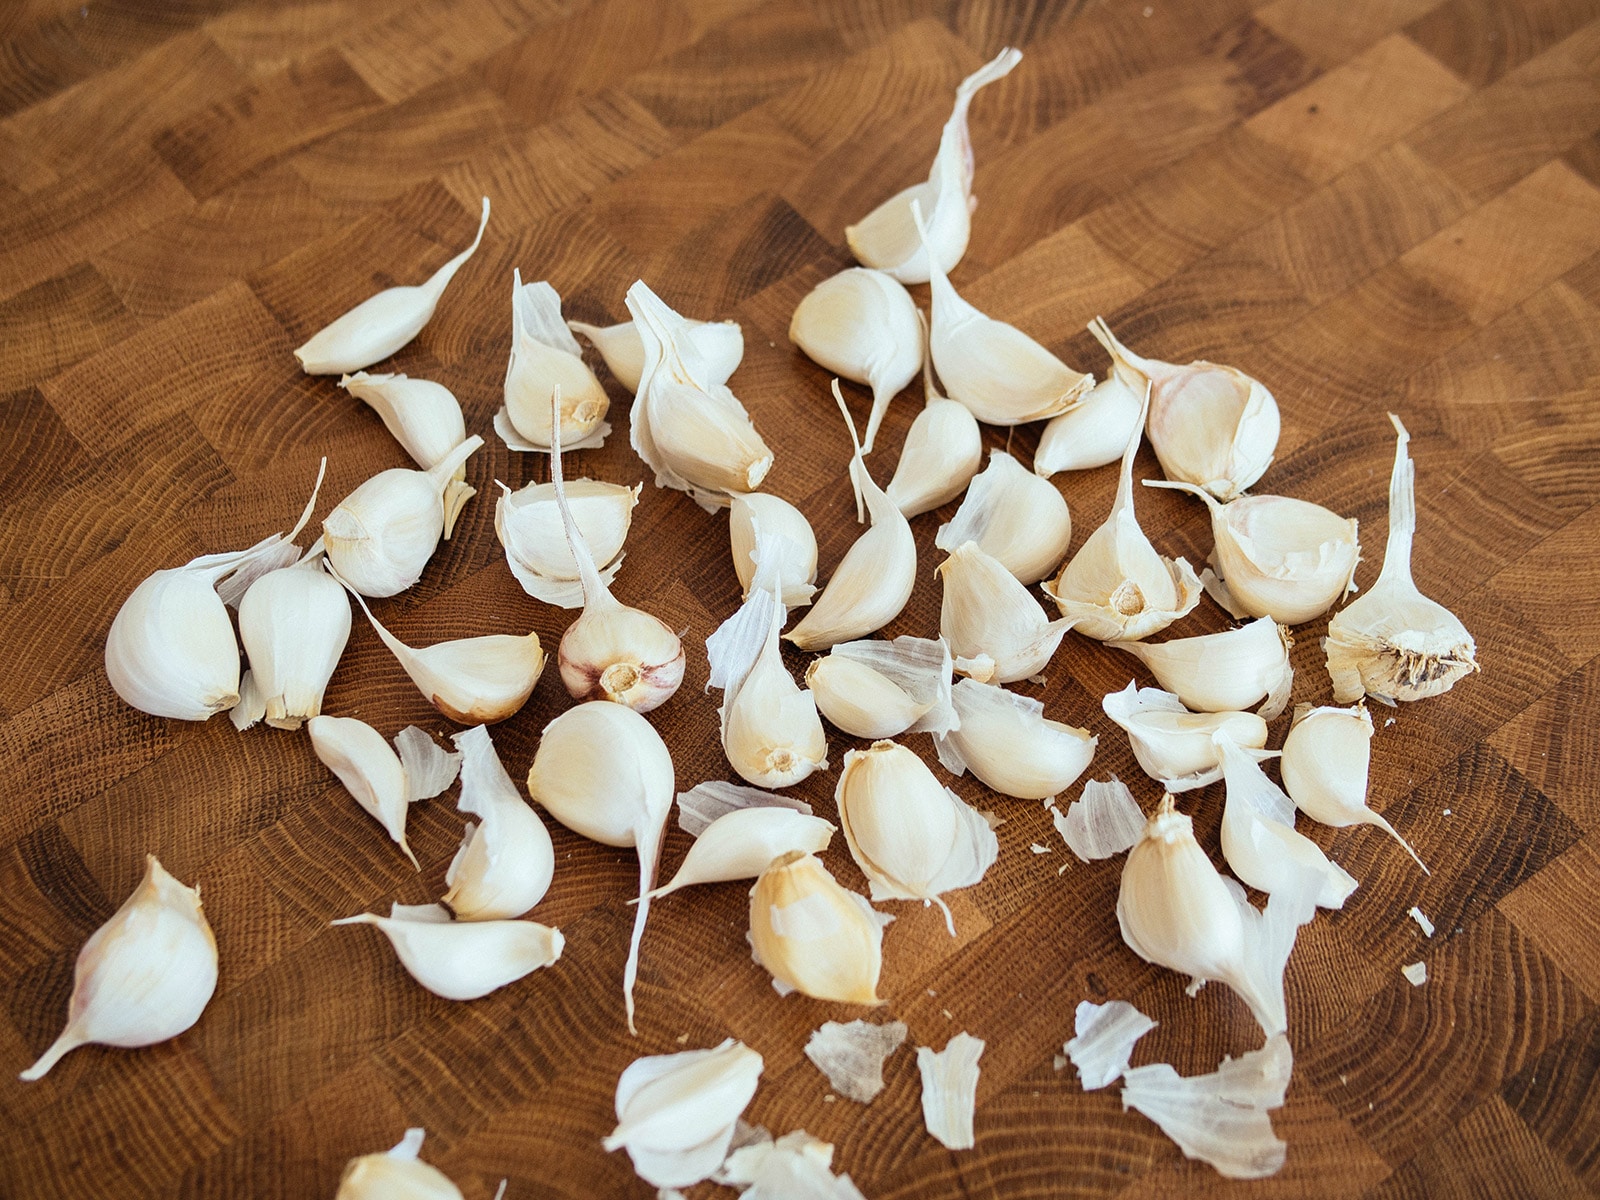 A pile of garlic cloves spread out on a butcher block counter